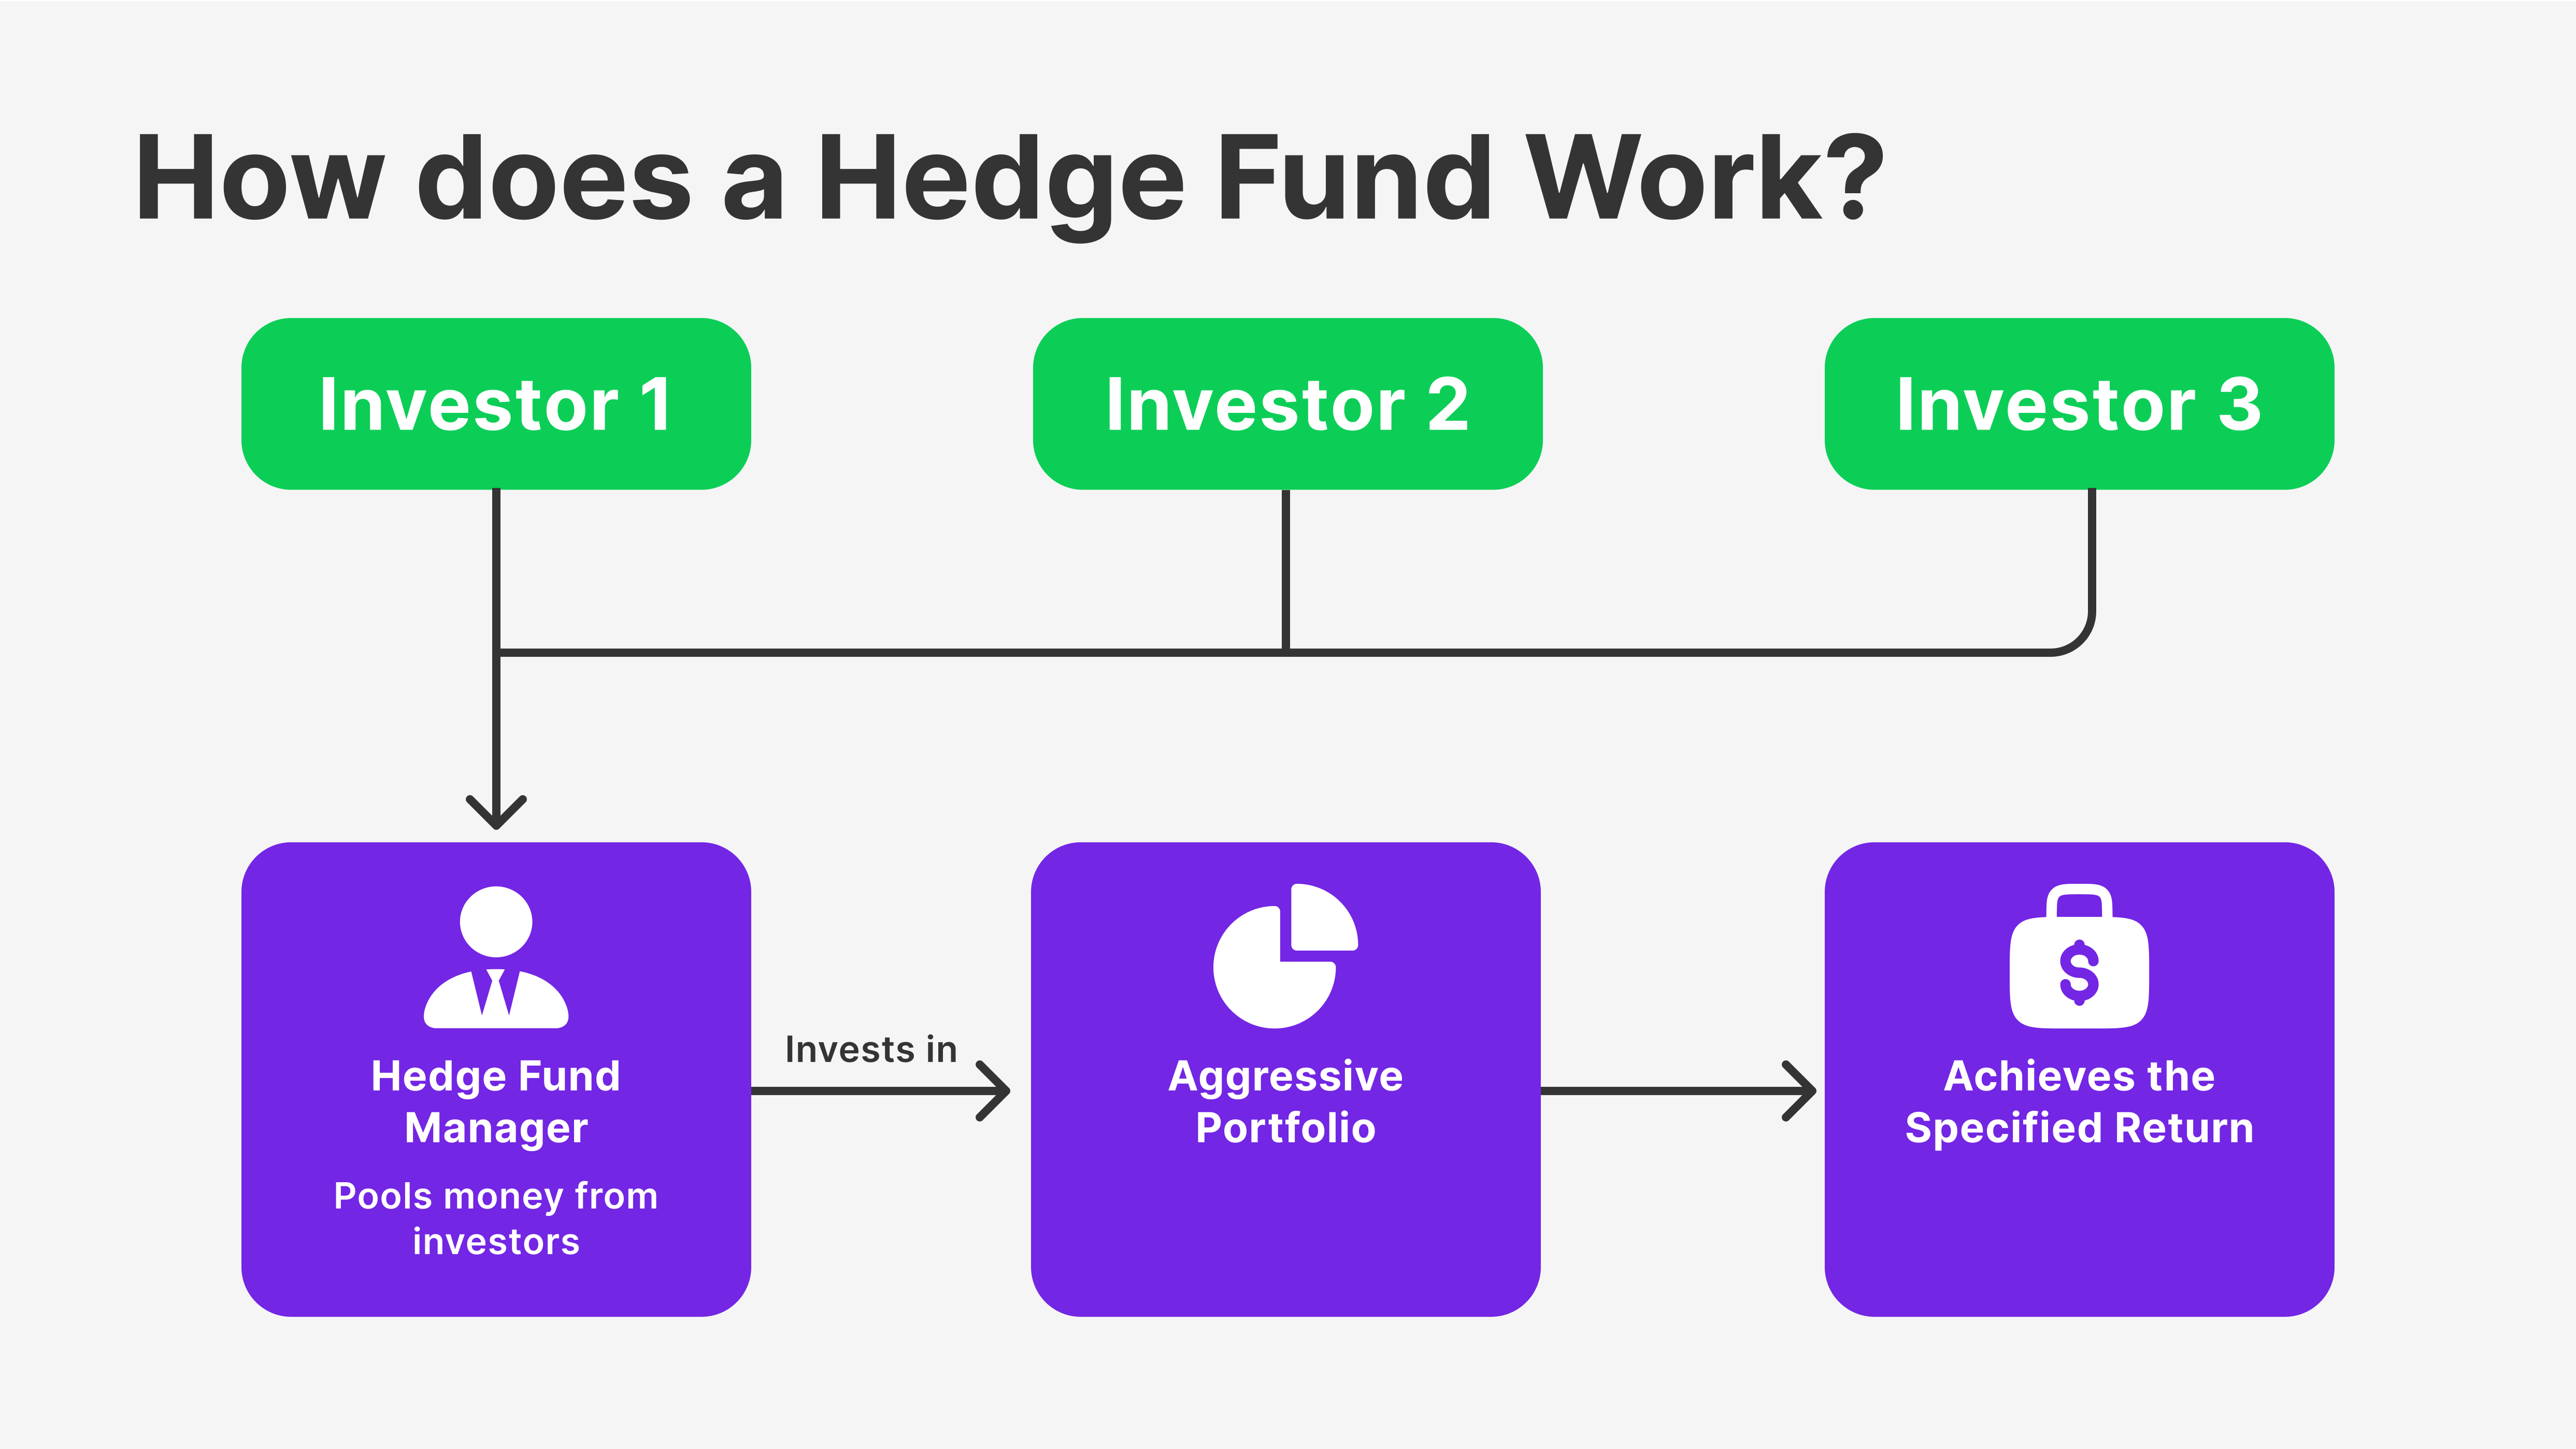 How hedge funds work